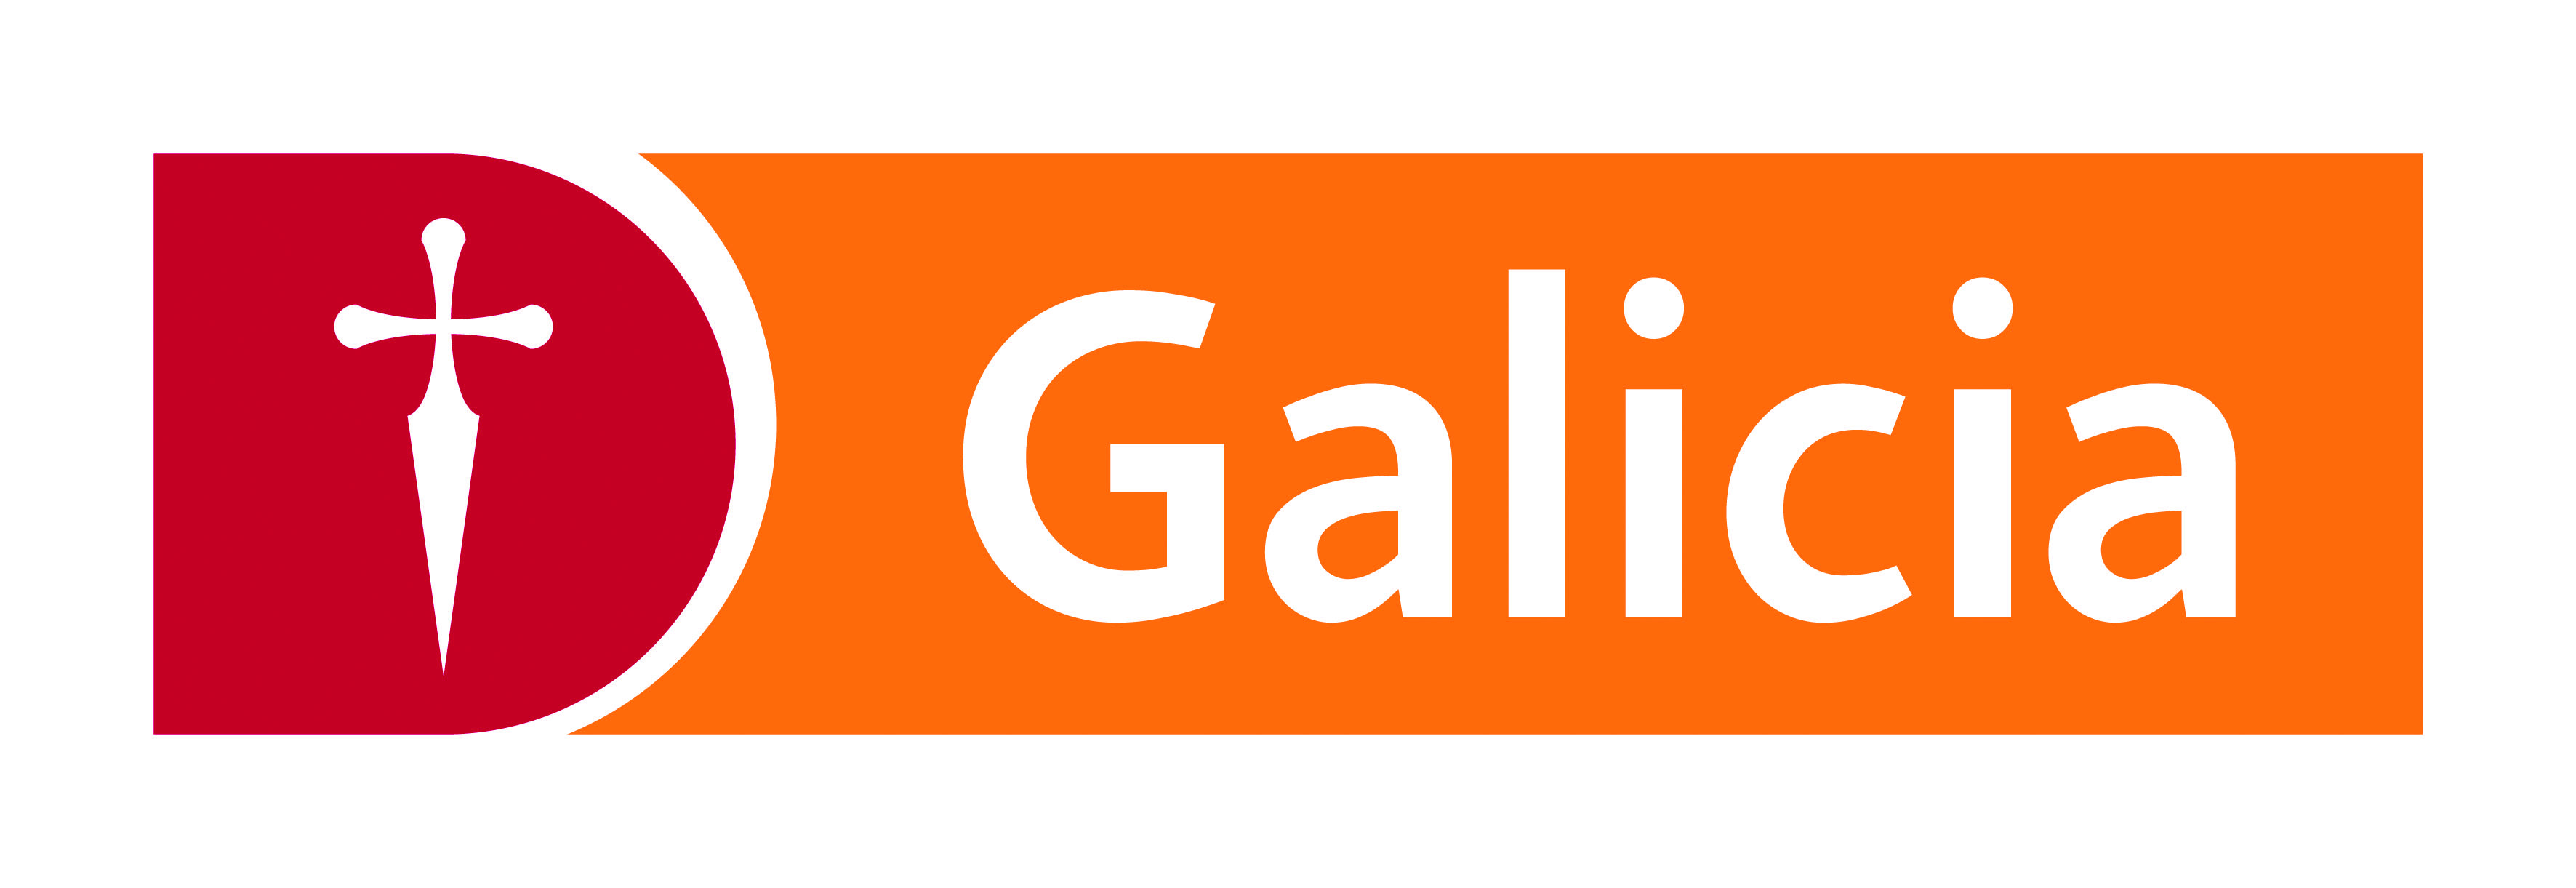 Banco Galicia Information About The Issuer Lei 579100kkdhkdffkkb072 Swift Gabaarbaxxx News And Credit Ratings Tables With Accounting And Financial Reports [ 1221 x 3543 Pixel ]